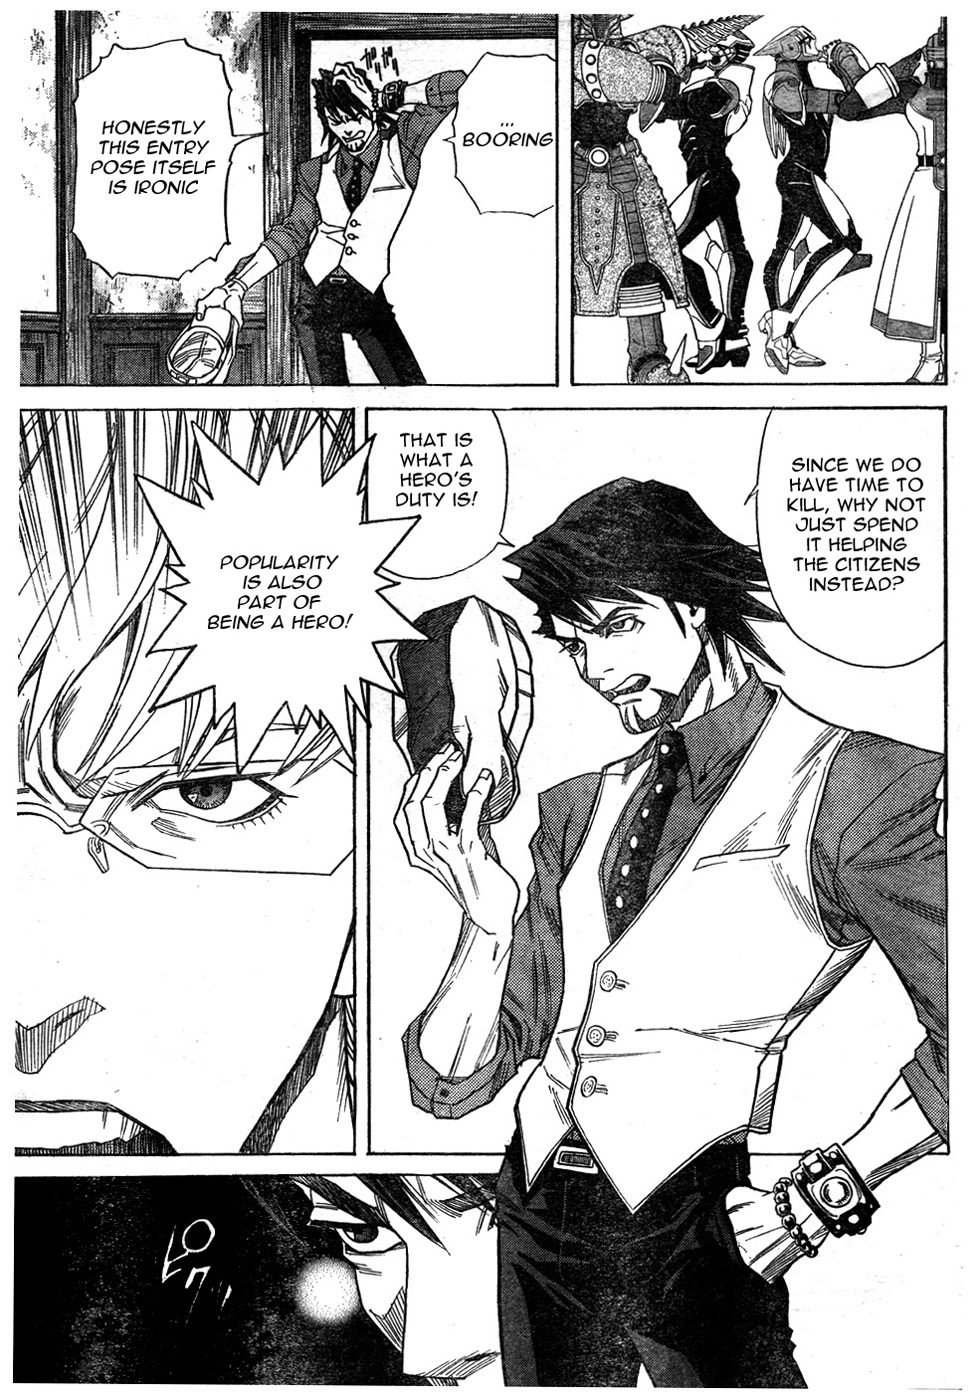 Tiger & Bunny Good luck and bad luck alternate like the strands of a rope Ch. Oneshot